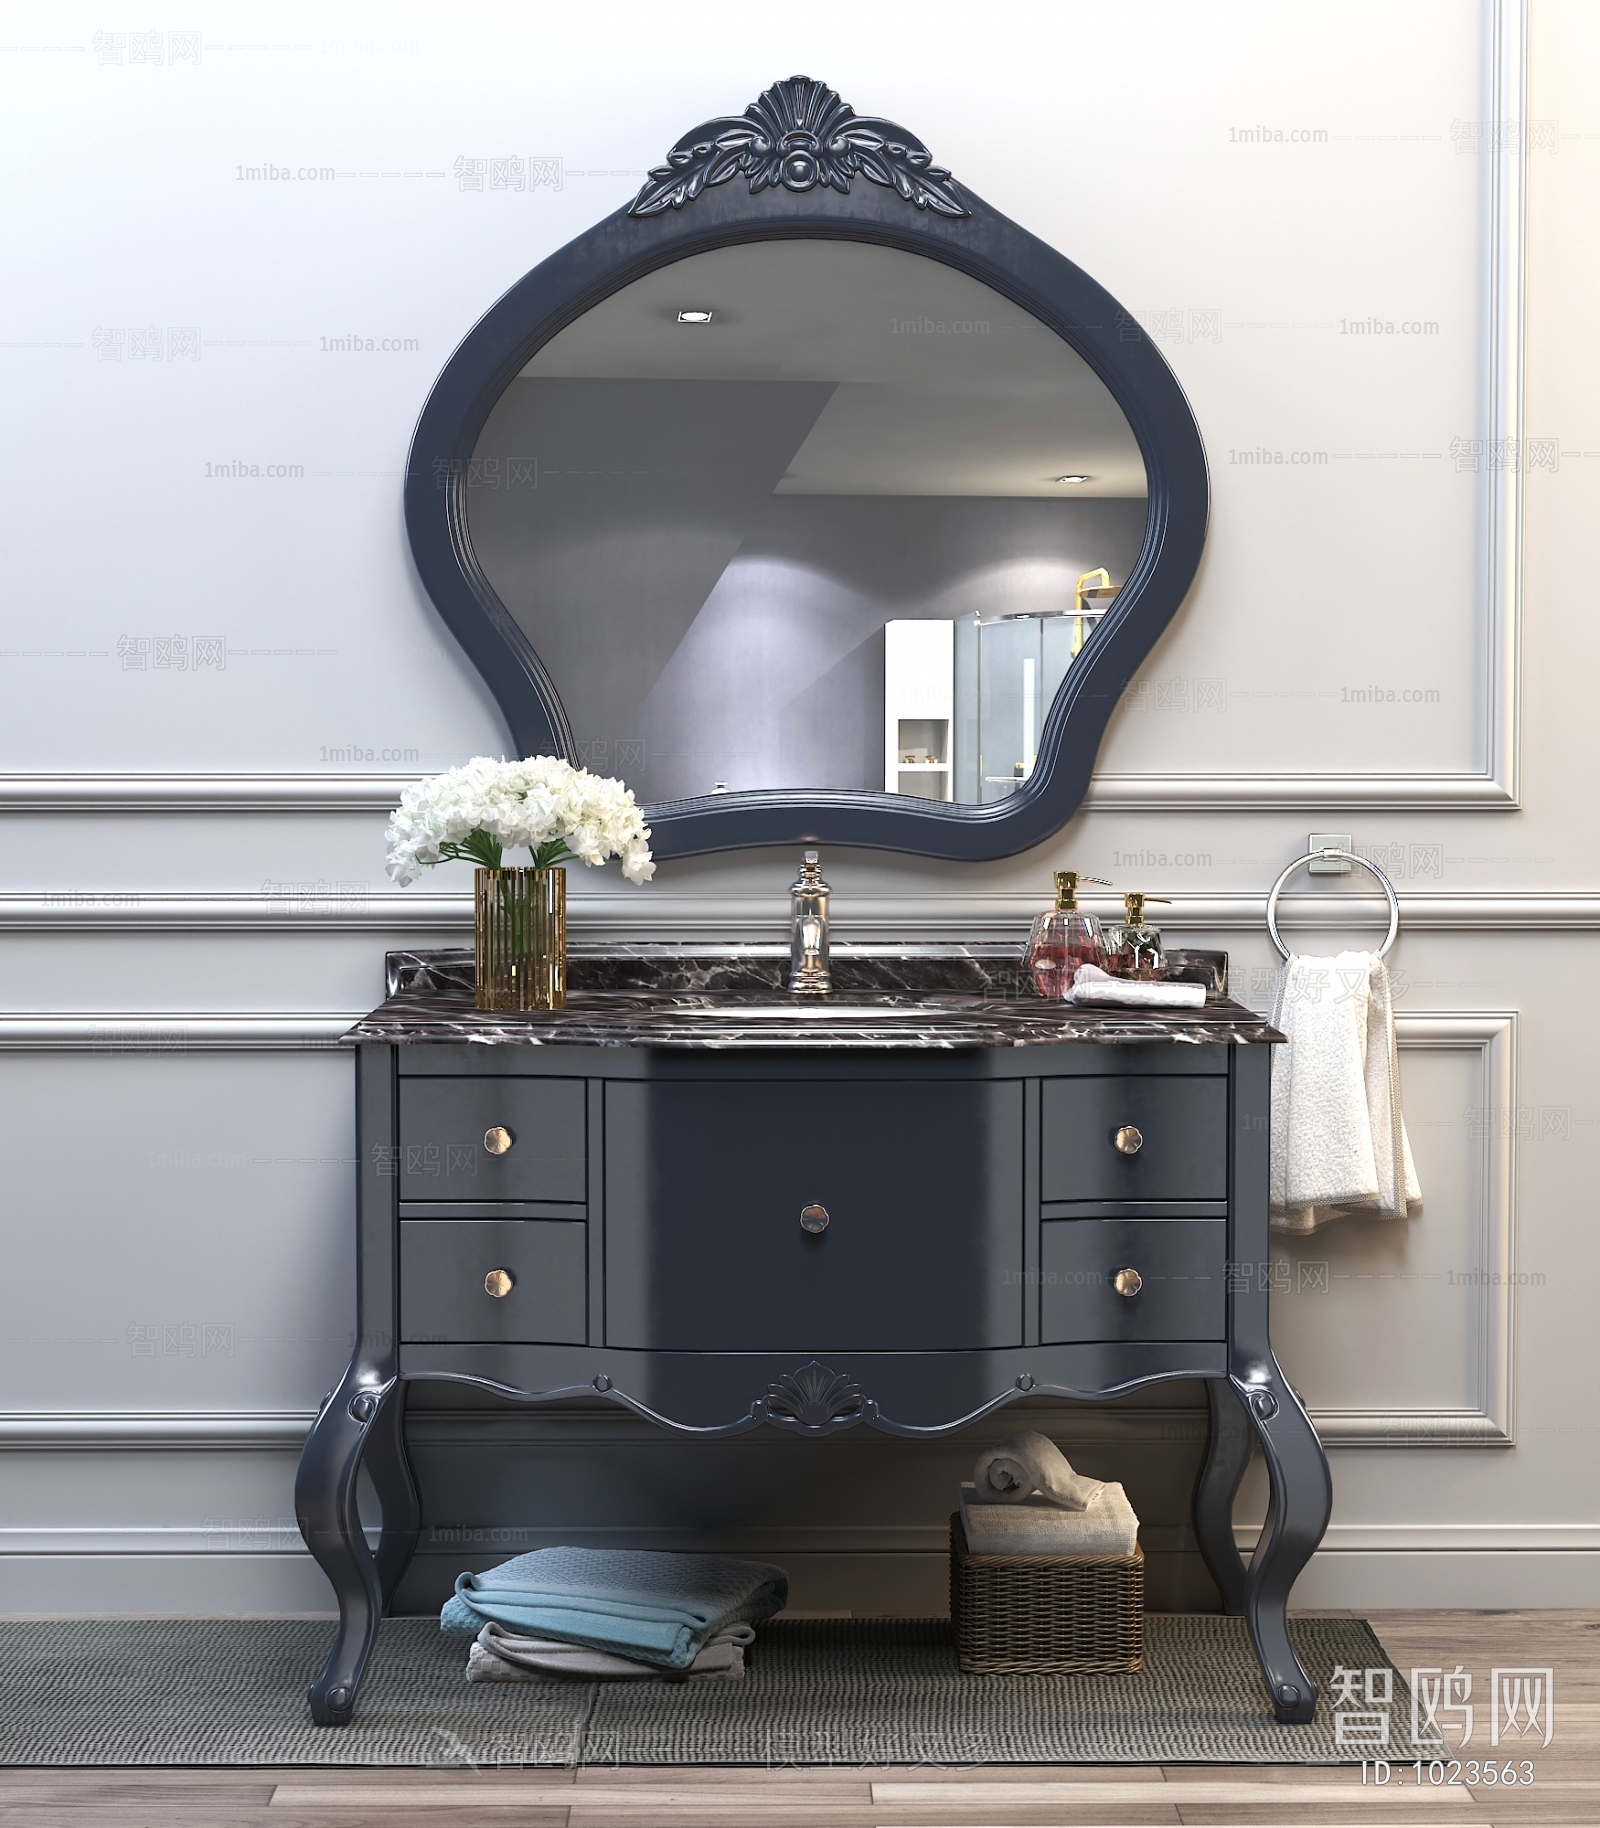 New Classical Style Bathroom Cabinet